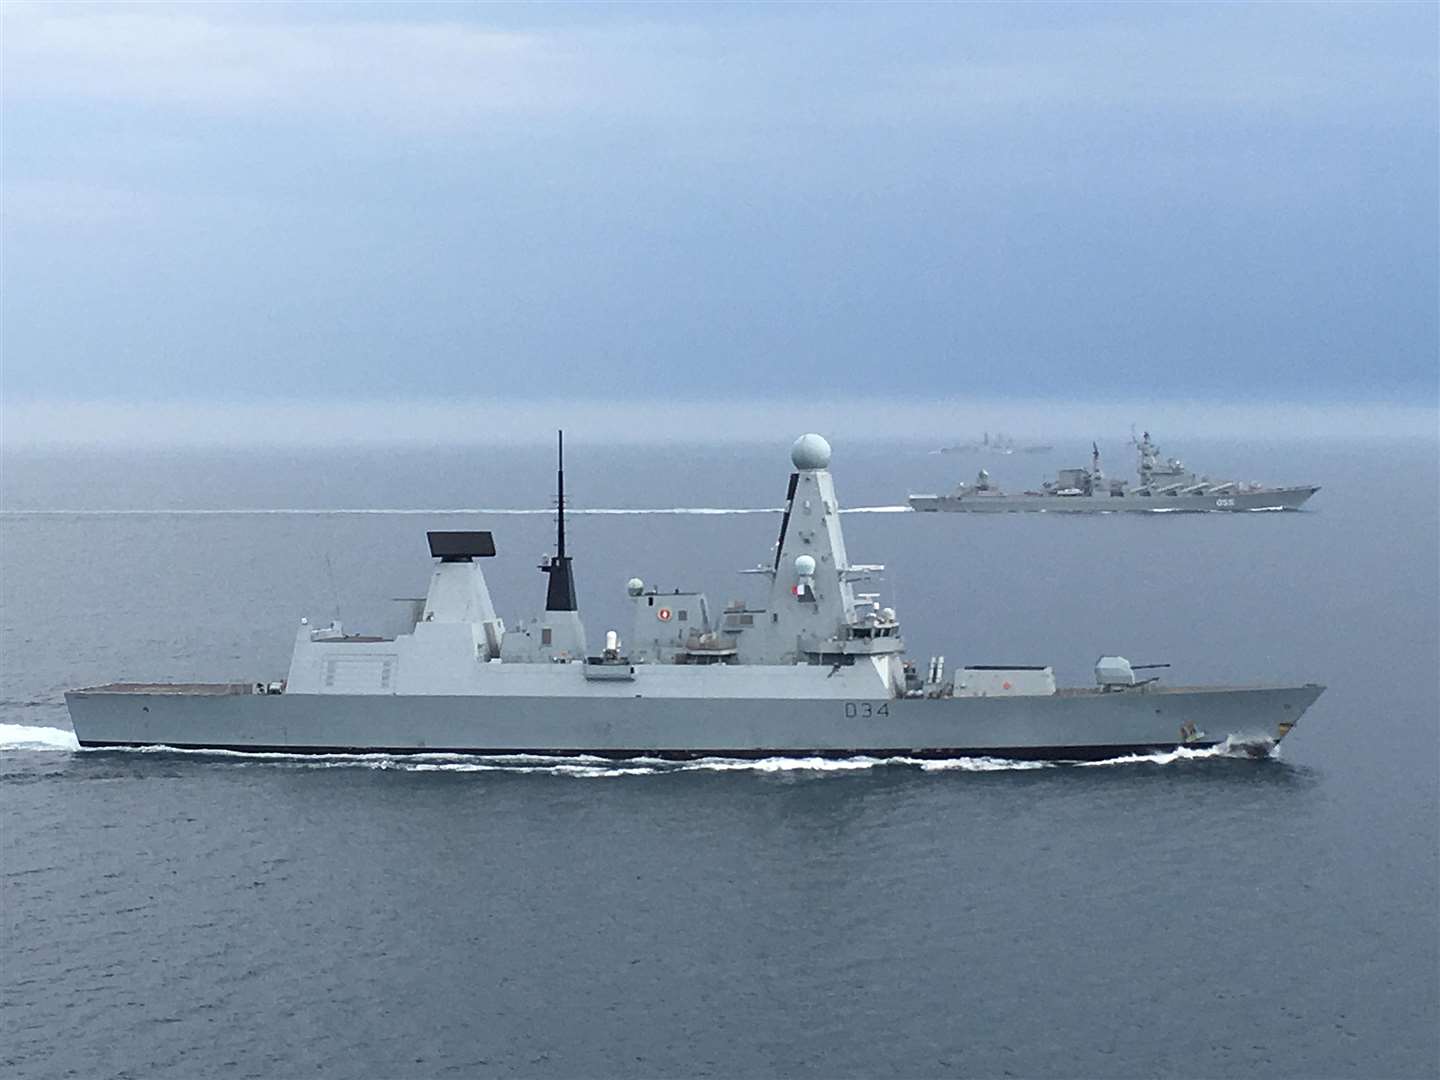 The destroyer HMS Diamond shadowed two Russian warships overnight as they passed through the English Channel. Picture: Crown copyright 2018